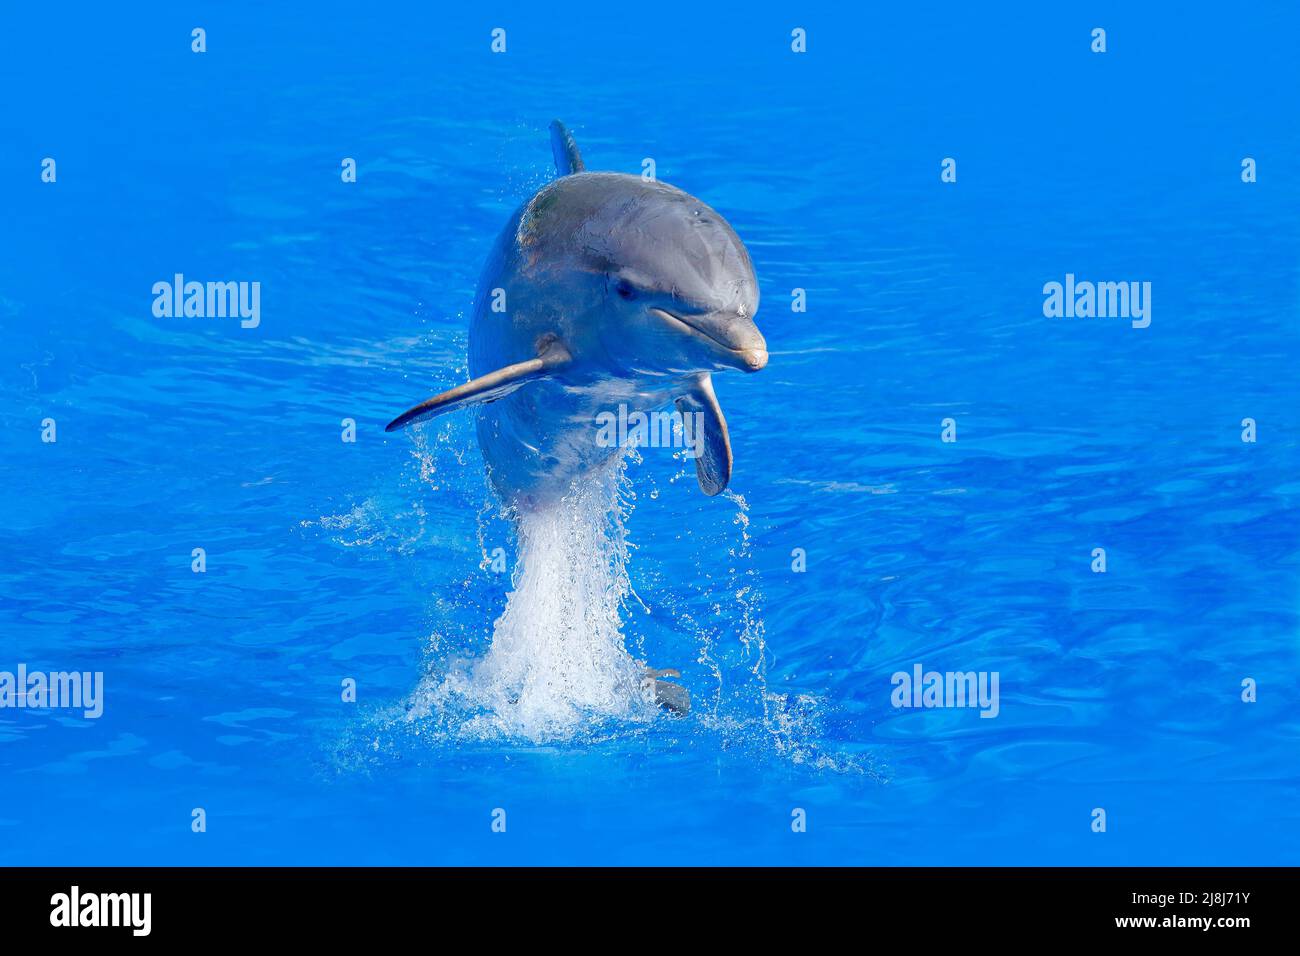 Ocean wave with animal. Bottlenosed dolphin, Tursiops truncatus, in the blue water. Wildlife action scene from ocean nature. Dolphin jump in the sea. Stock Photo